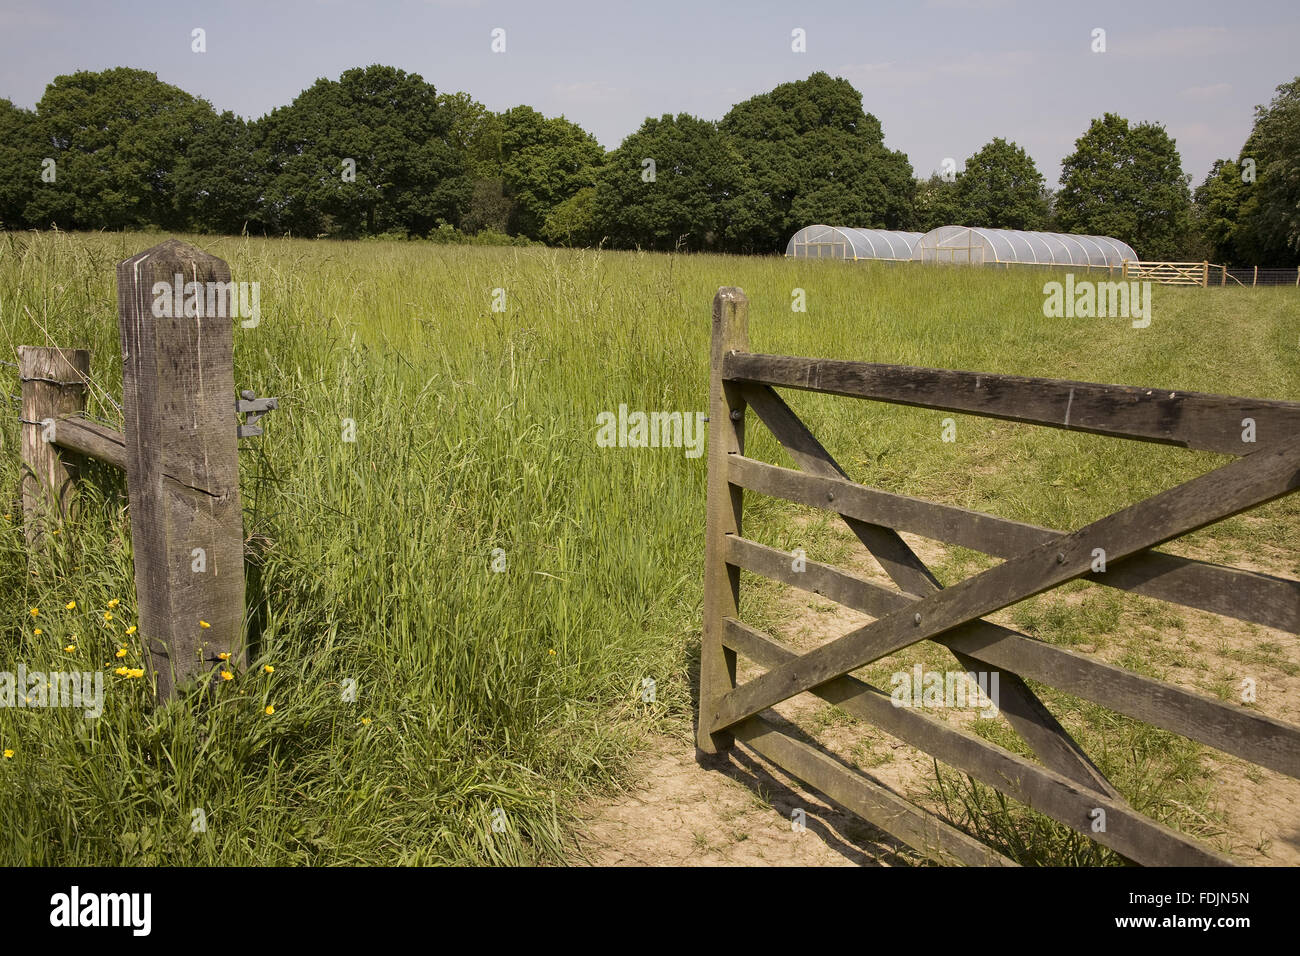 A view of farmland which will be redeveloped at Sissinghurst Castle, Kent. This project aims to reconnect the garden with the landscape in the form of creating a modern, organic, mixed Wealden farm, much as it would have been in 1930 when the Nicolsons bo Stock Photo